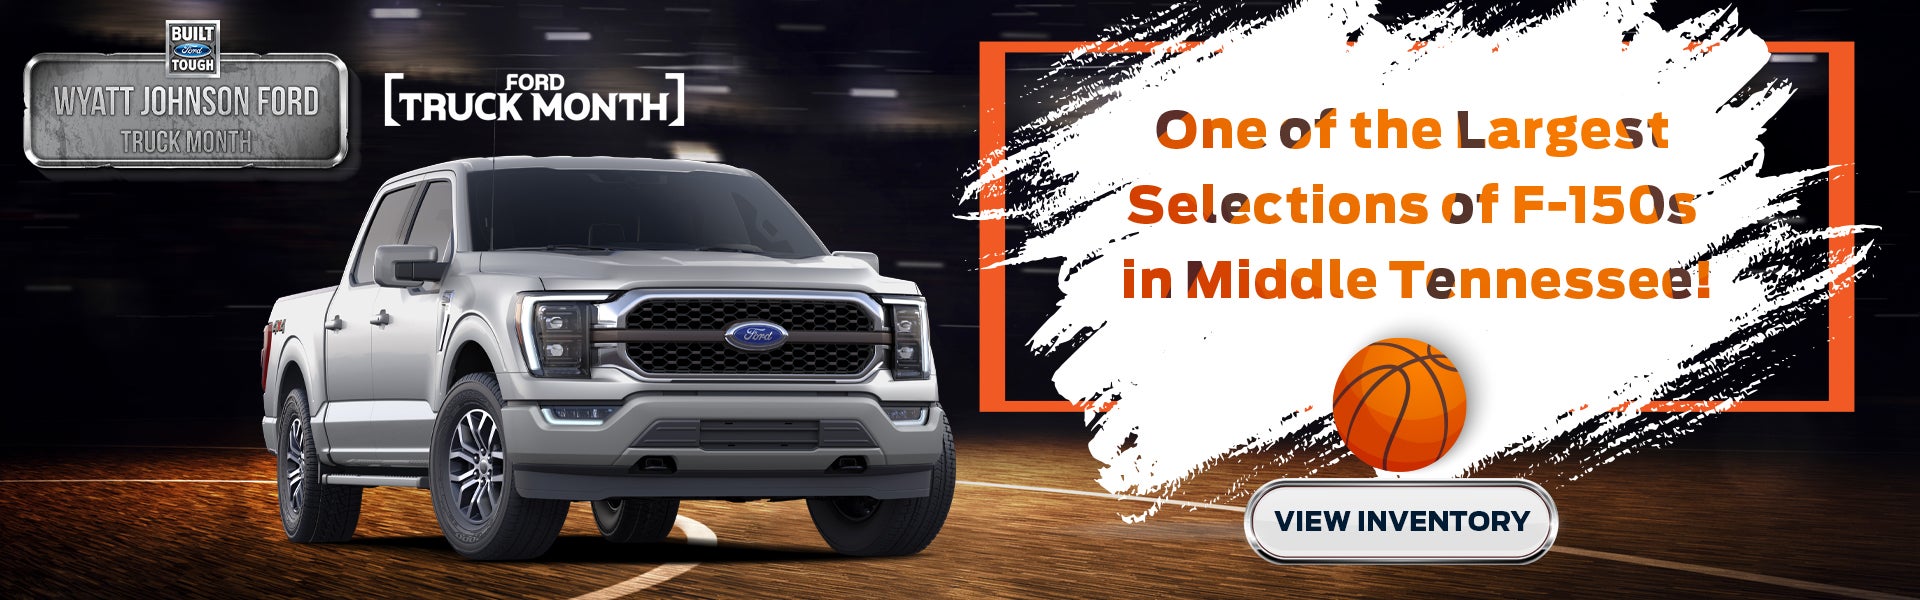 Shop our massive selection of Ford F-150s in Nashville, TN